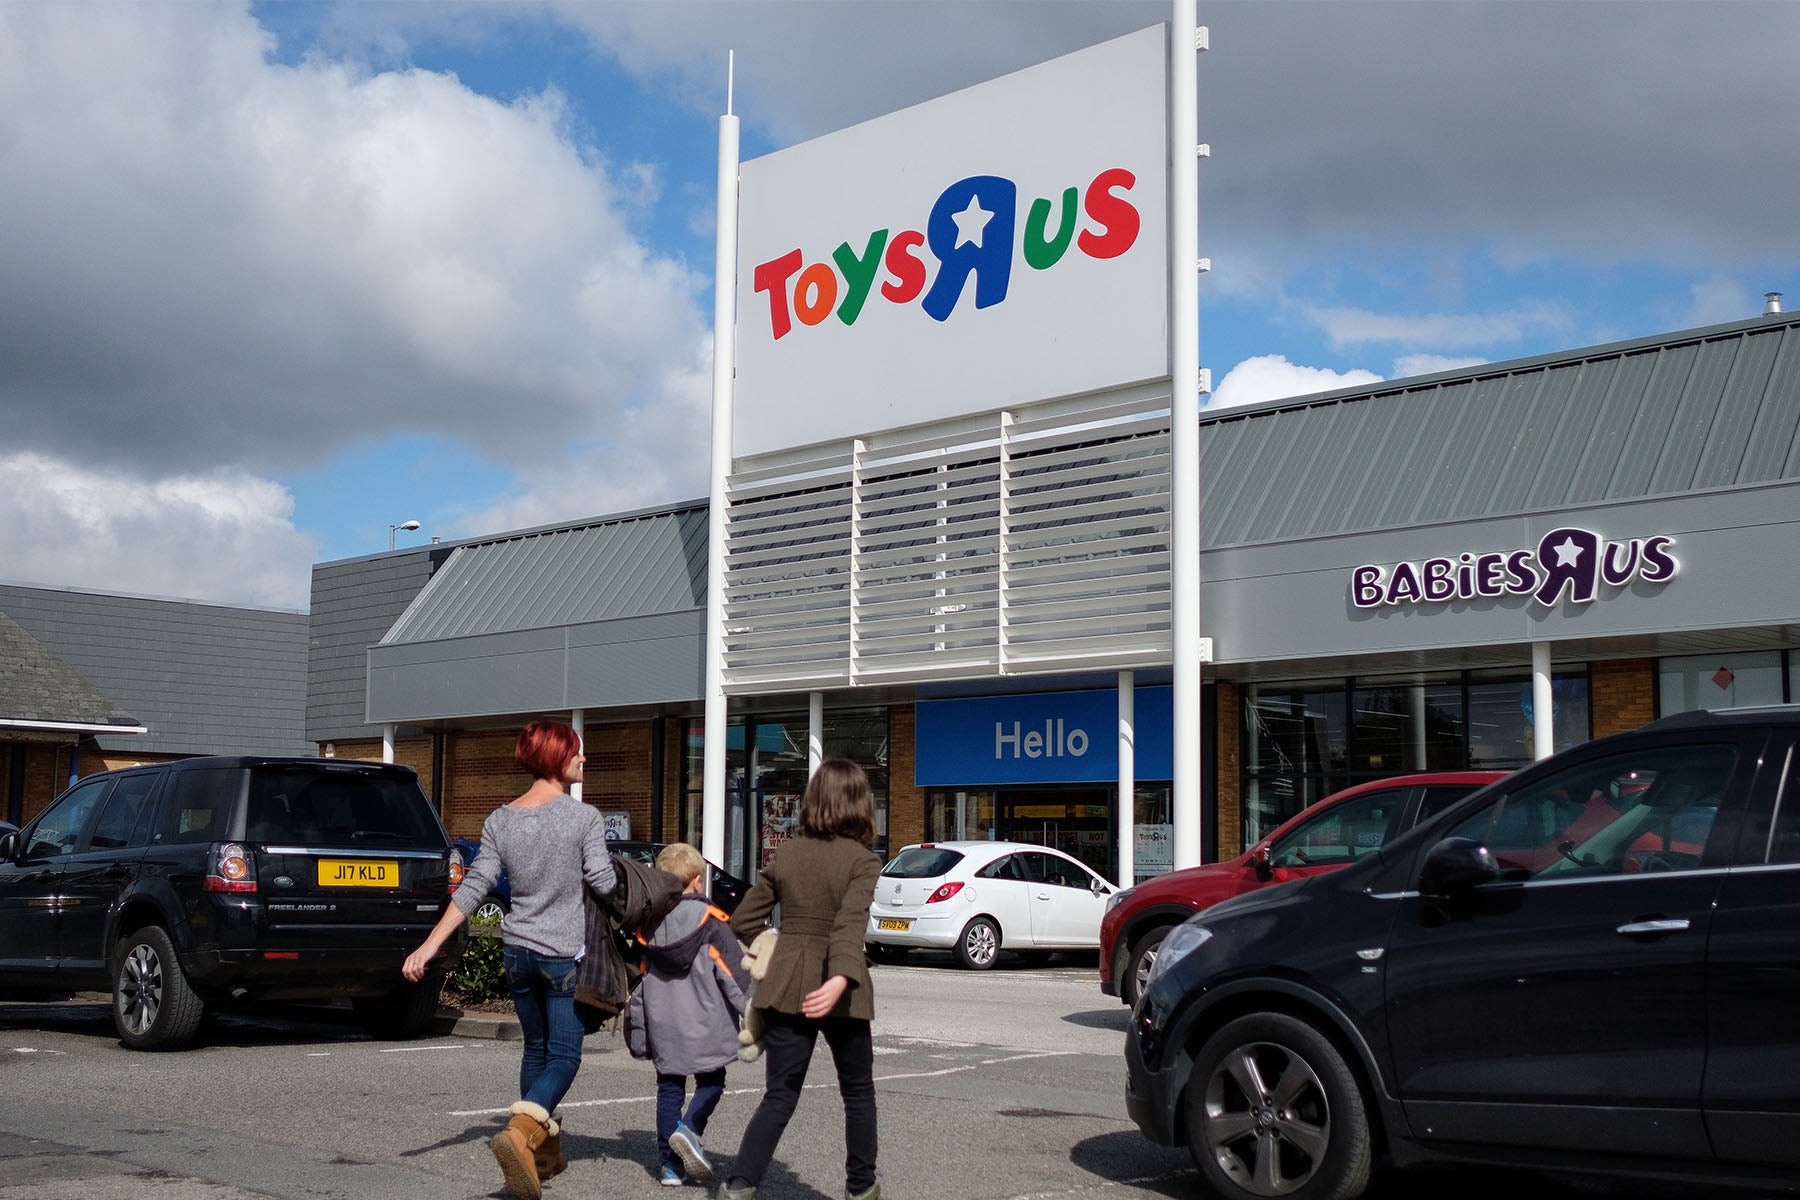 Customers walk toward a branch of the toy store Toys R Us on Tuesday in Luton, England.